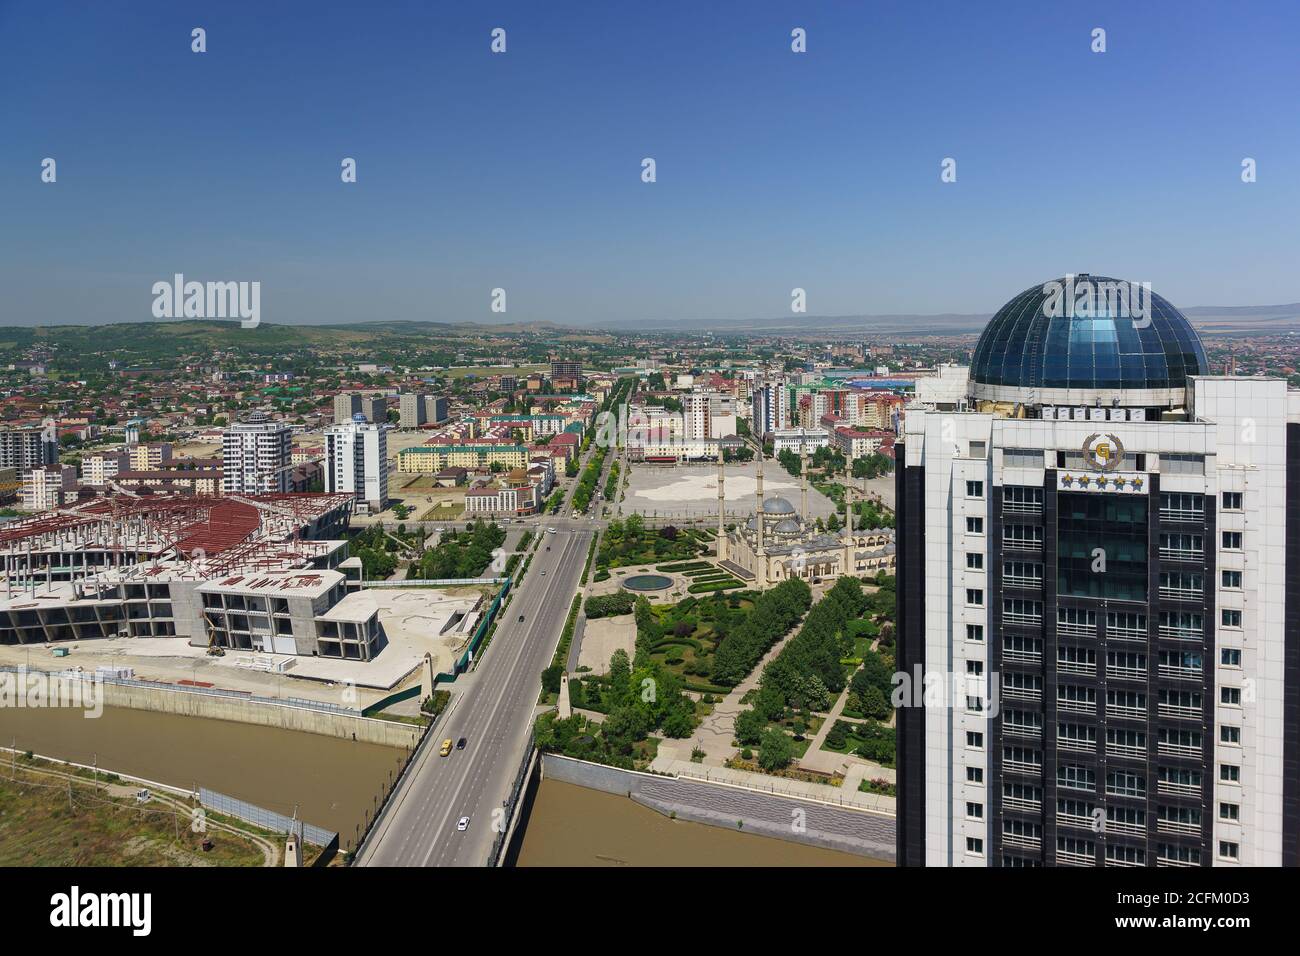 Grozny, Chechen Republic, Russia - June 02, 2019: top View of the main mosque in the Heart of Chechnya, Grozny city hotel and other facilities in the Stock Photo